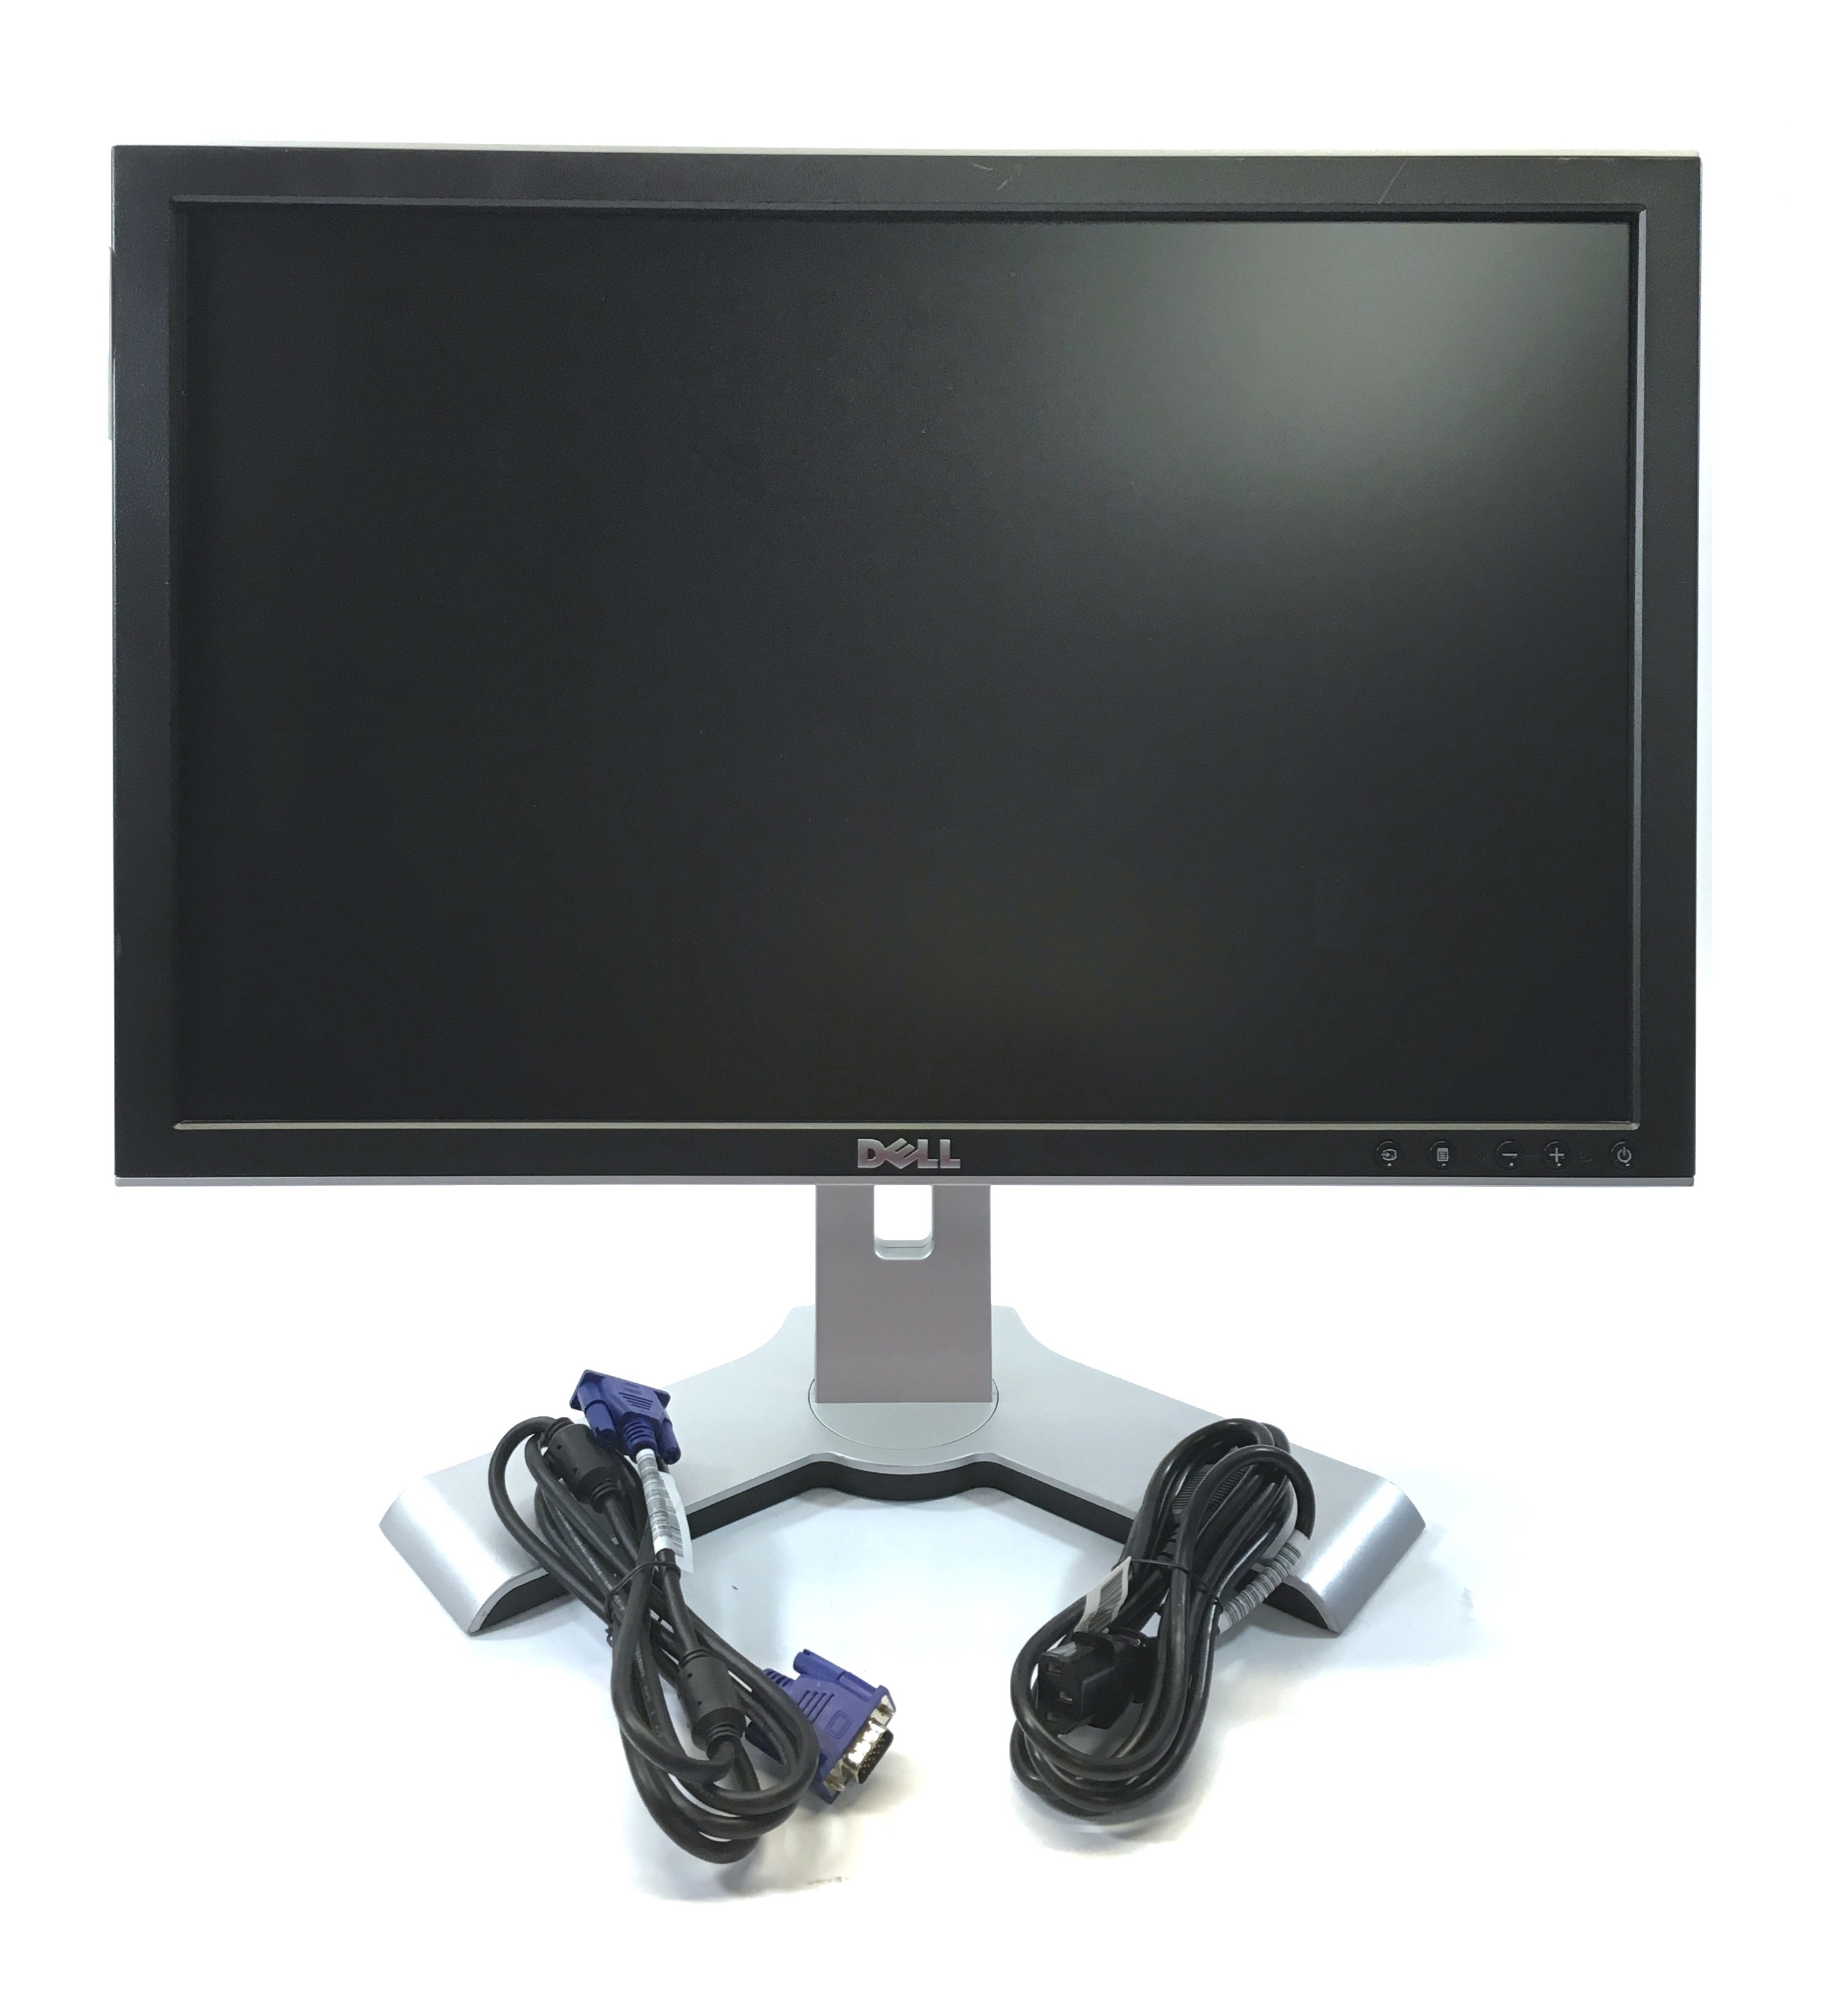 acer g235h monitor driver